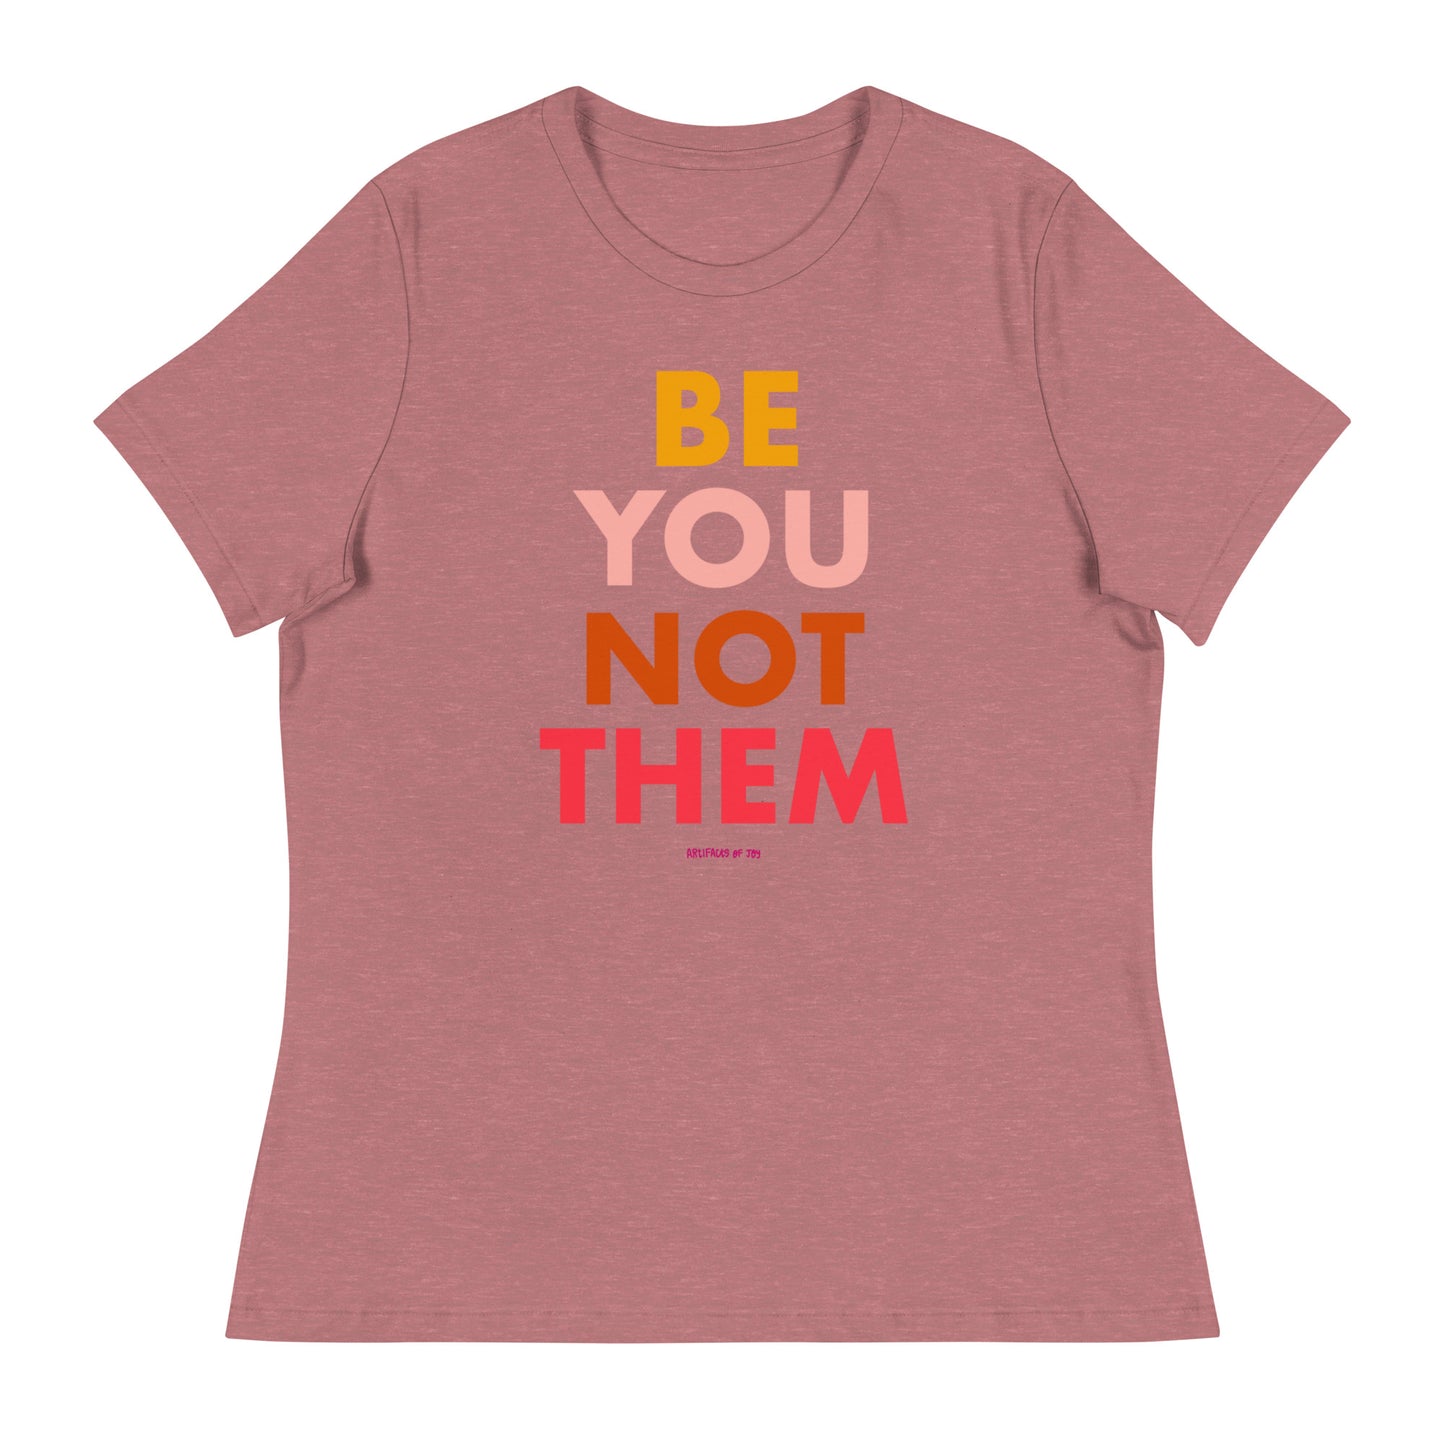 T-Shirt Women's Relaxed Be You Not Them